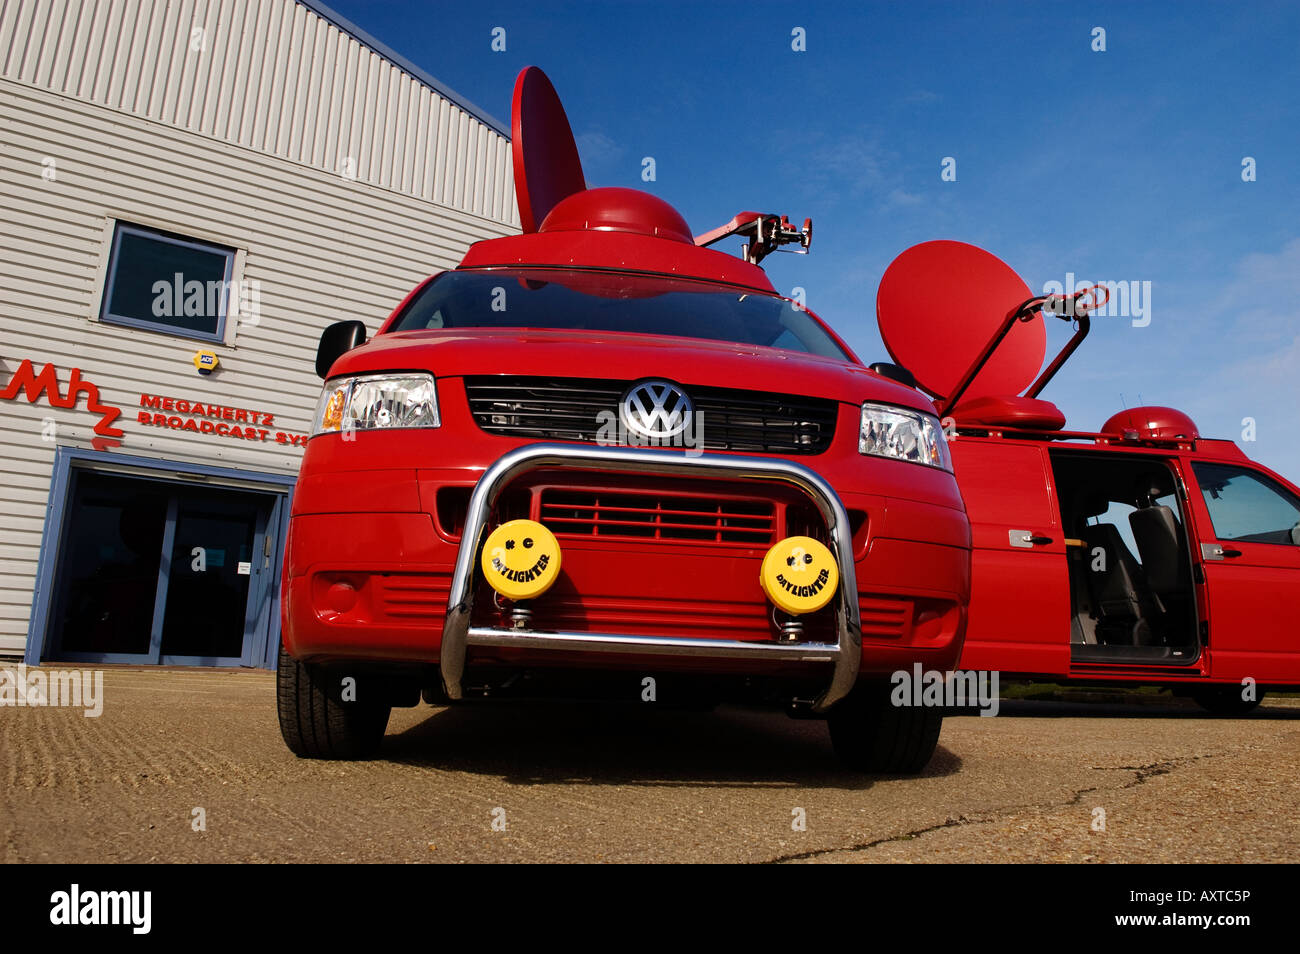 Two volkswagen satellite trucks displayed outside the factory of the integrators Megahertz Broadcast Systems Ltd Stock Photo